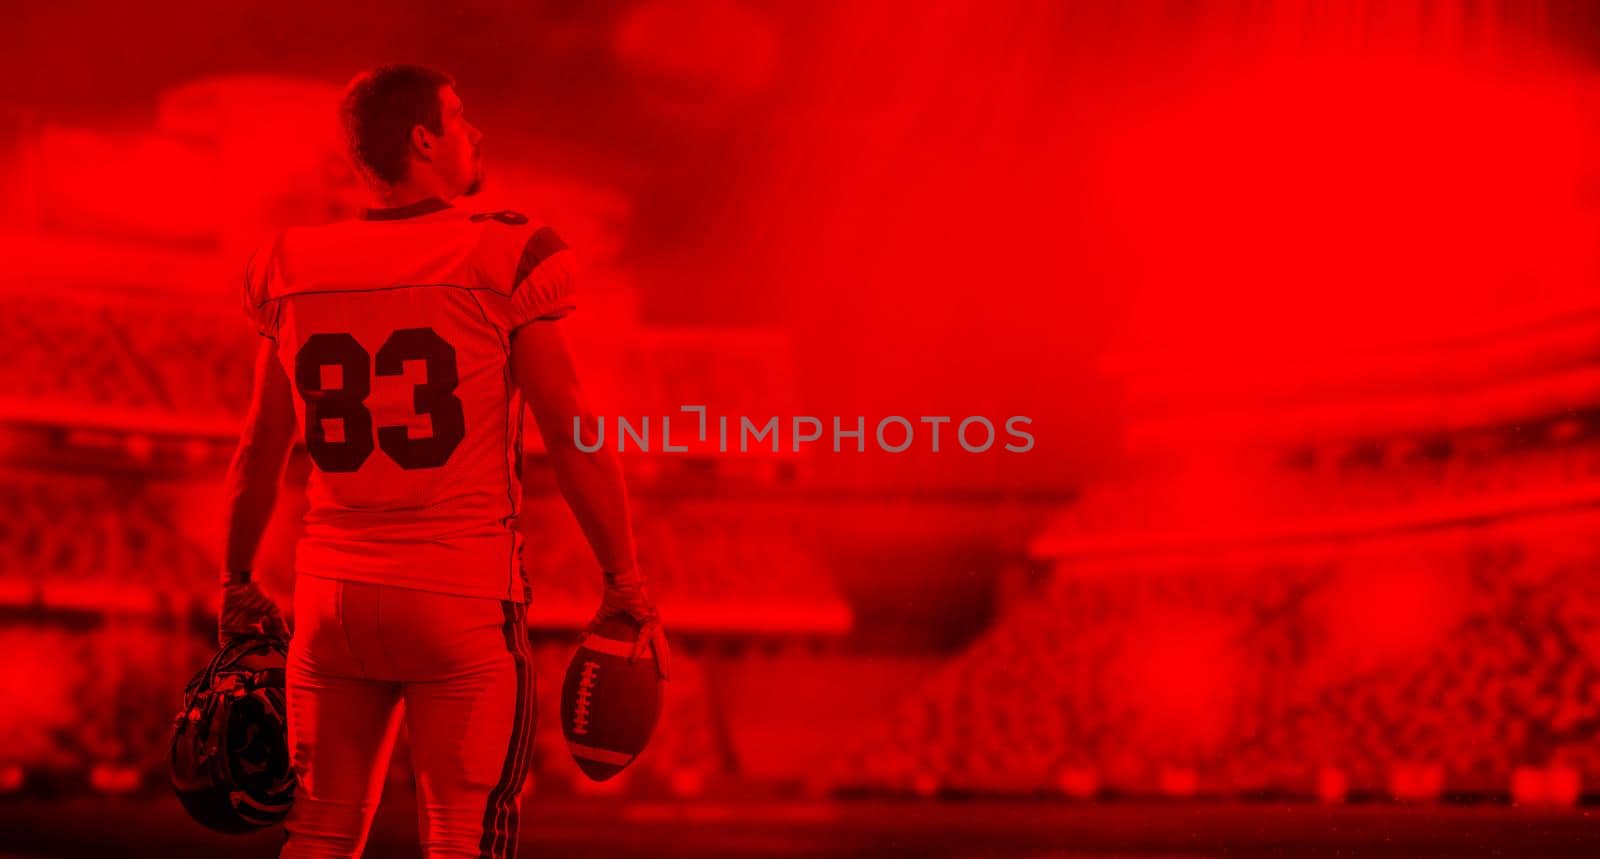 duo toned american football player in  arena at night with stadium lights